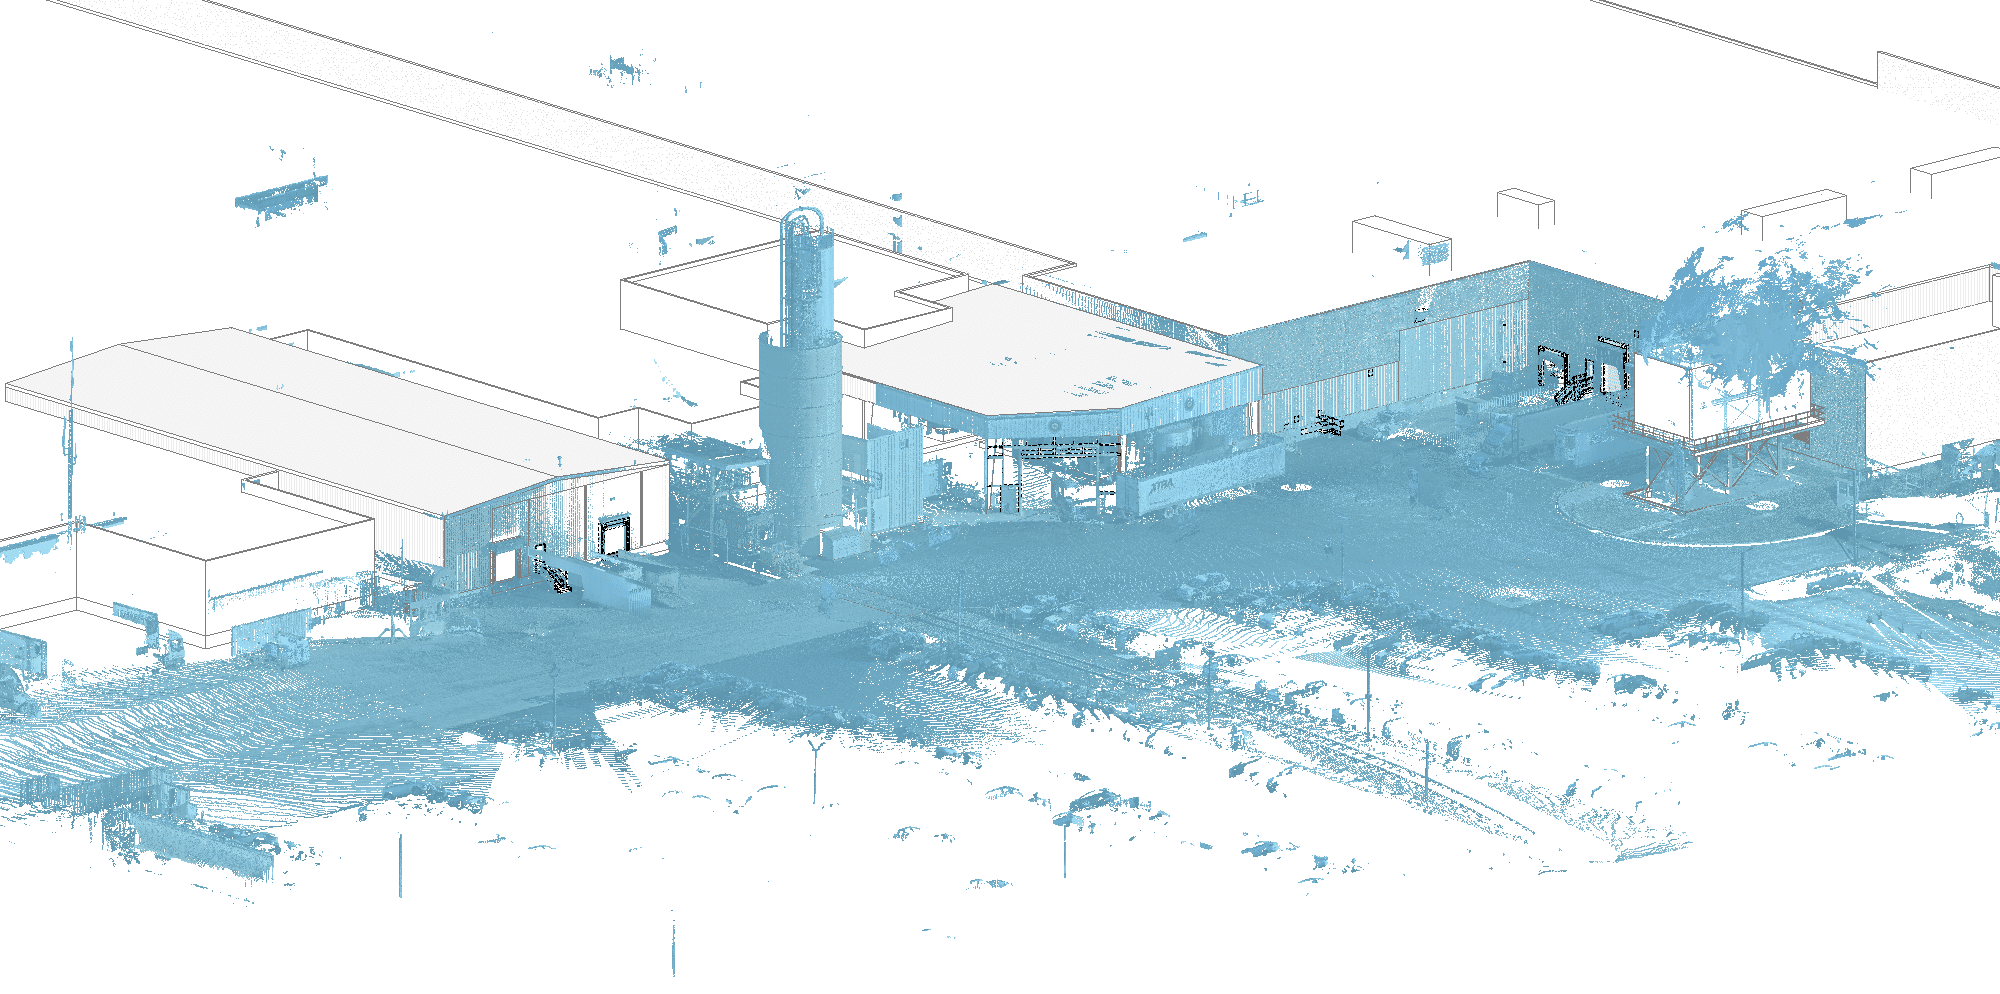 White and blue digital point cloud image of Hershey Robinson facility.